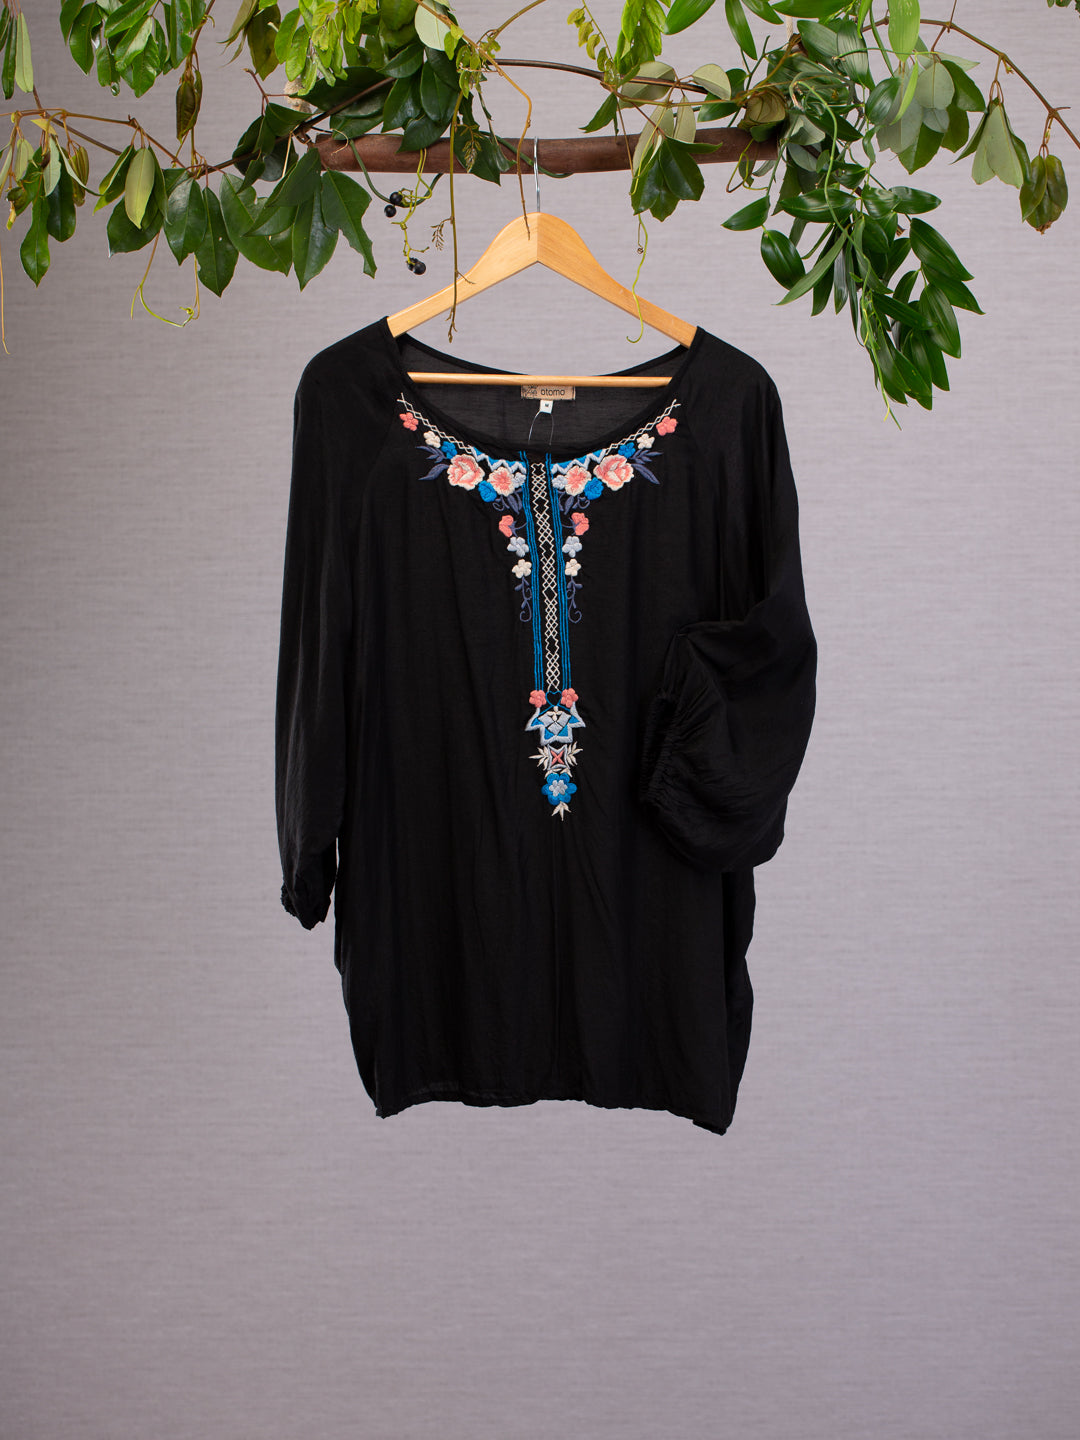 Black silk linen blend top Top features bold embroidered patterns around its neckline, the black silk linen blend is gathered with elastic at the cuff and styled in a flowing generous fit.